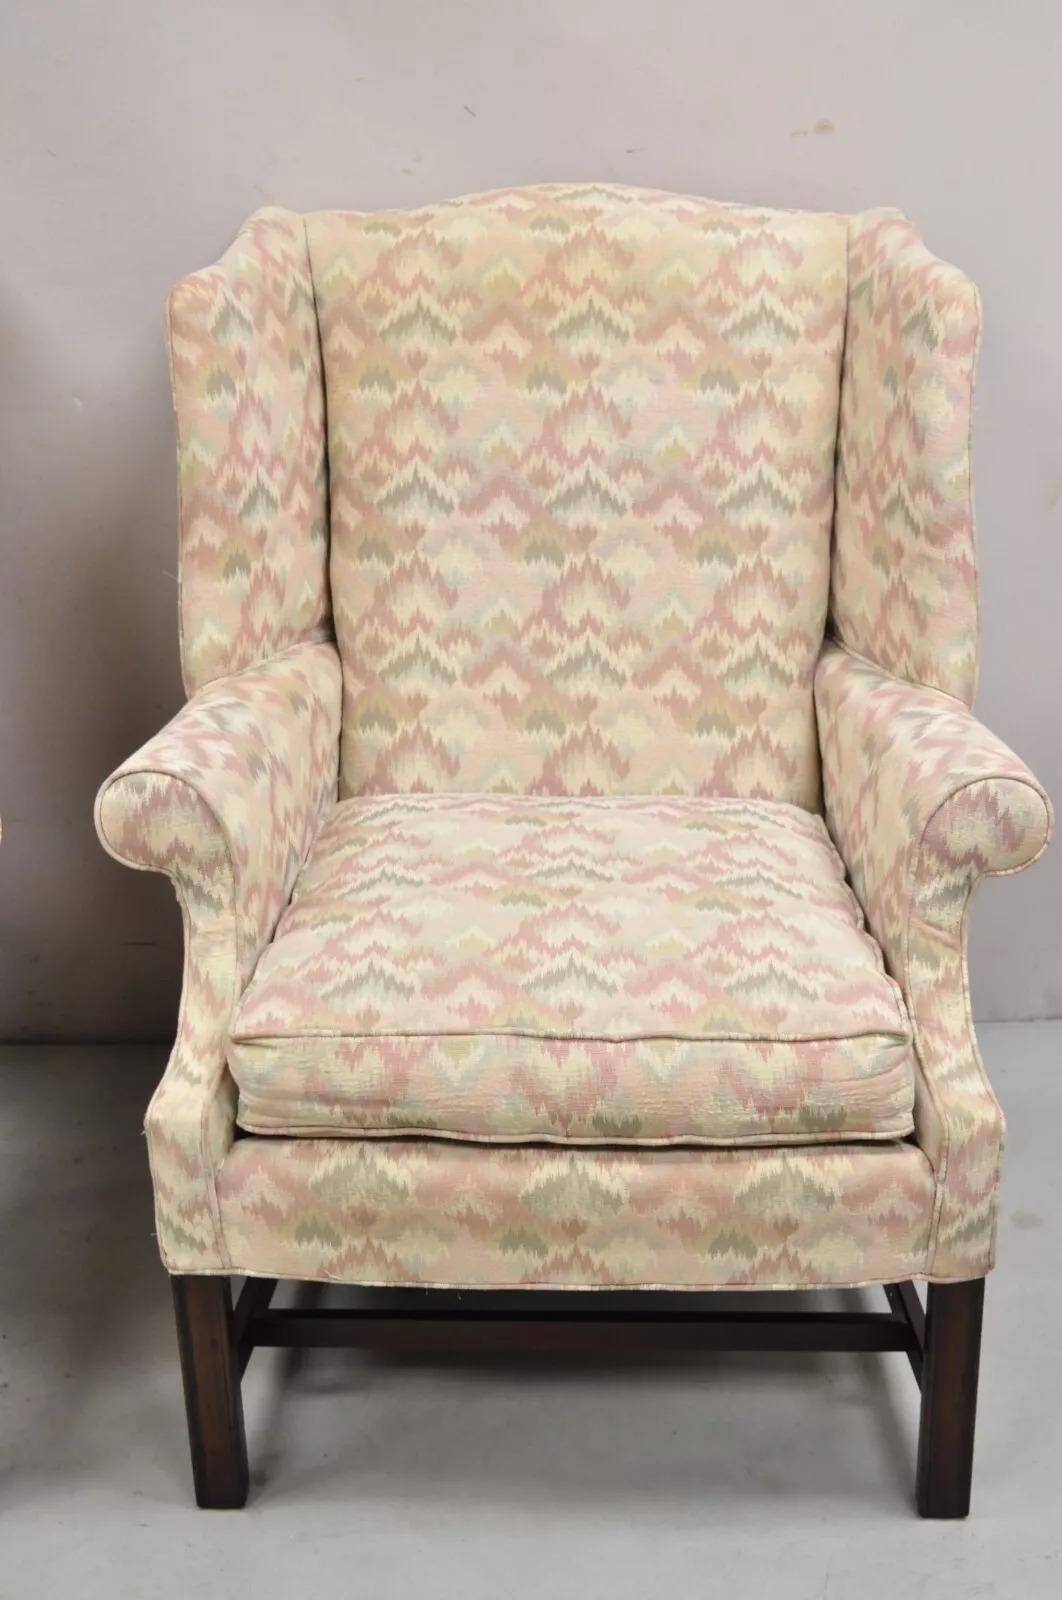 20th Century Frederick Edward Georgian Style Upholstered Wingback Lounge Arm Chairs - a Pair For Sale